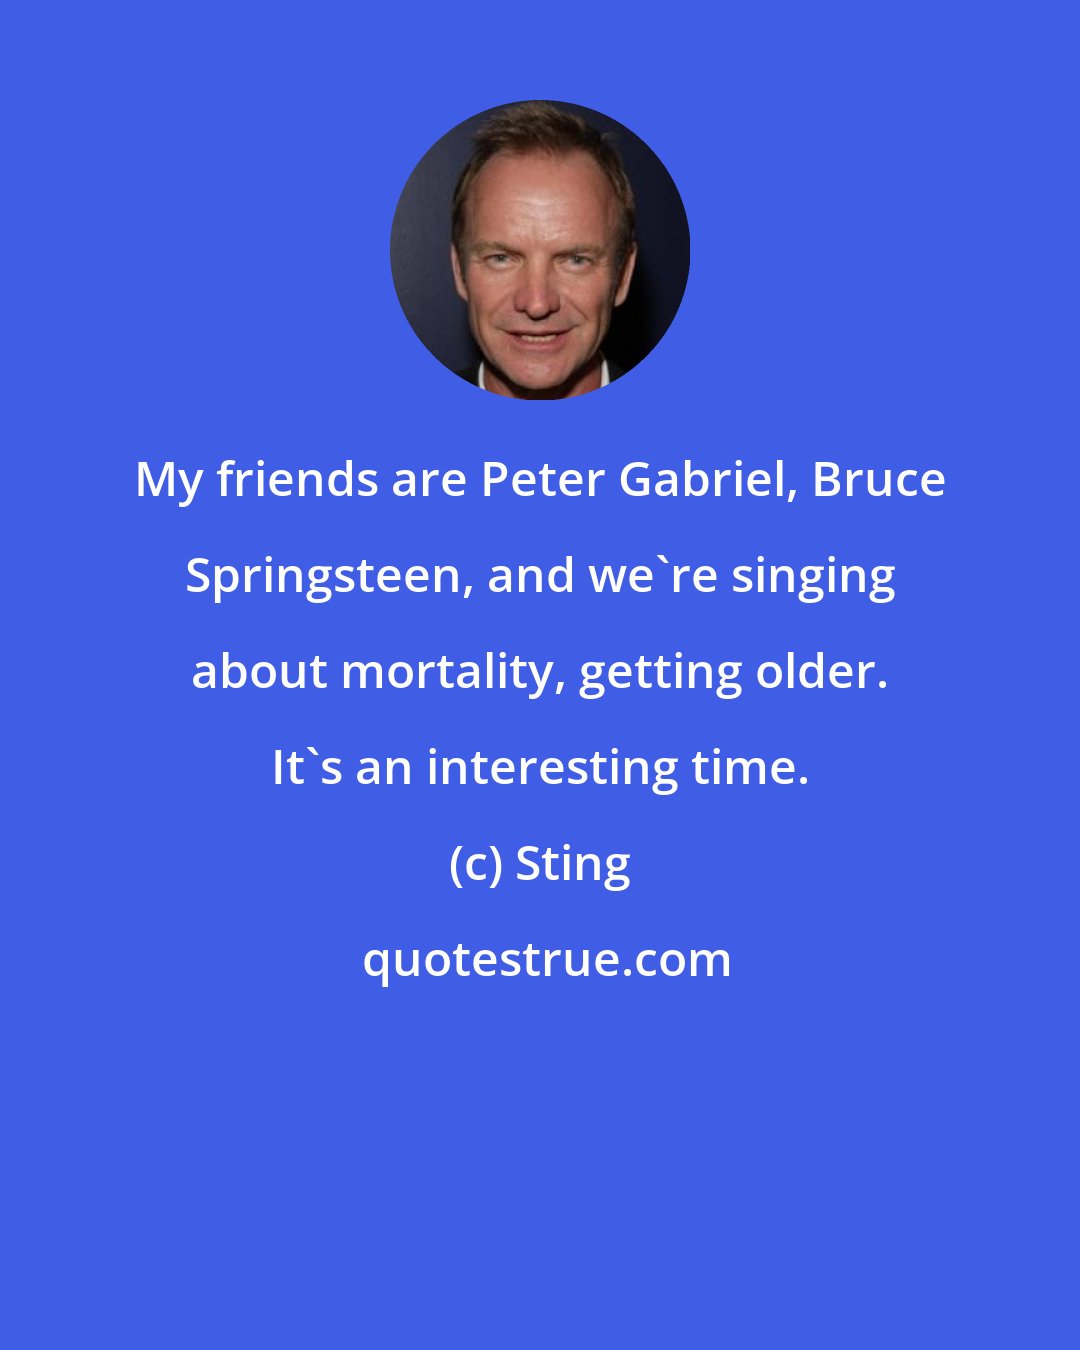 Sting: My friends are Peter Gabriel, Bruce Springsteen, and we're singing about mortality, getting older. It's an interesting time.